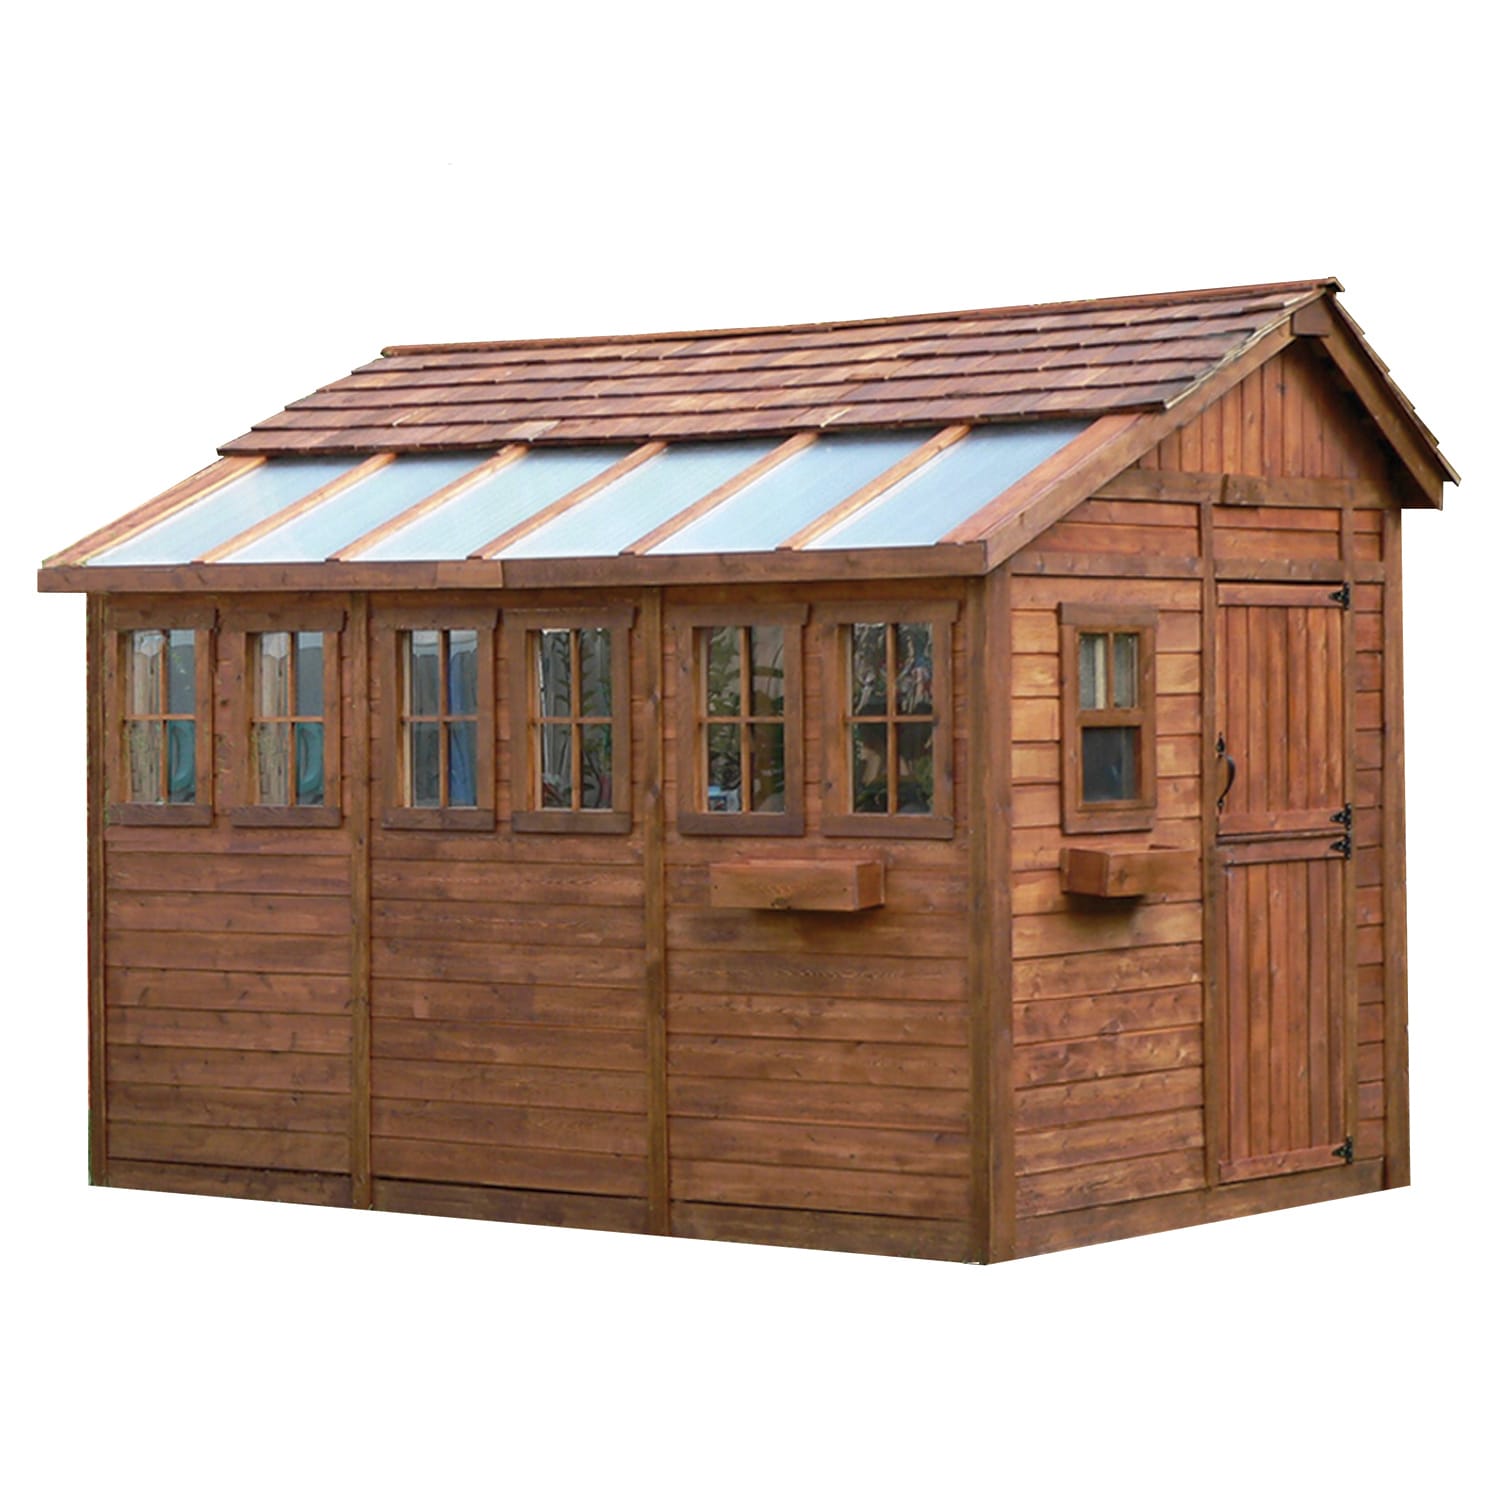  sheds at lowes for sale